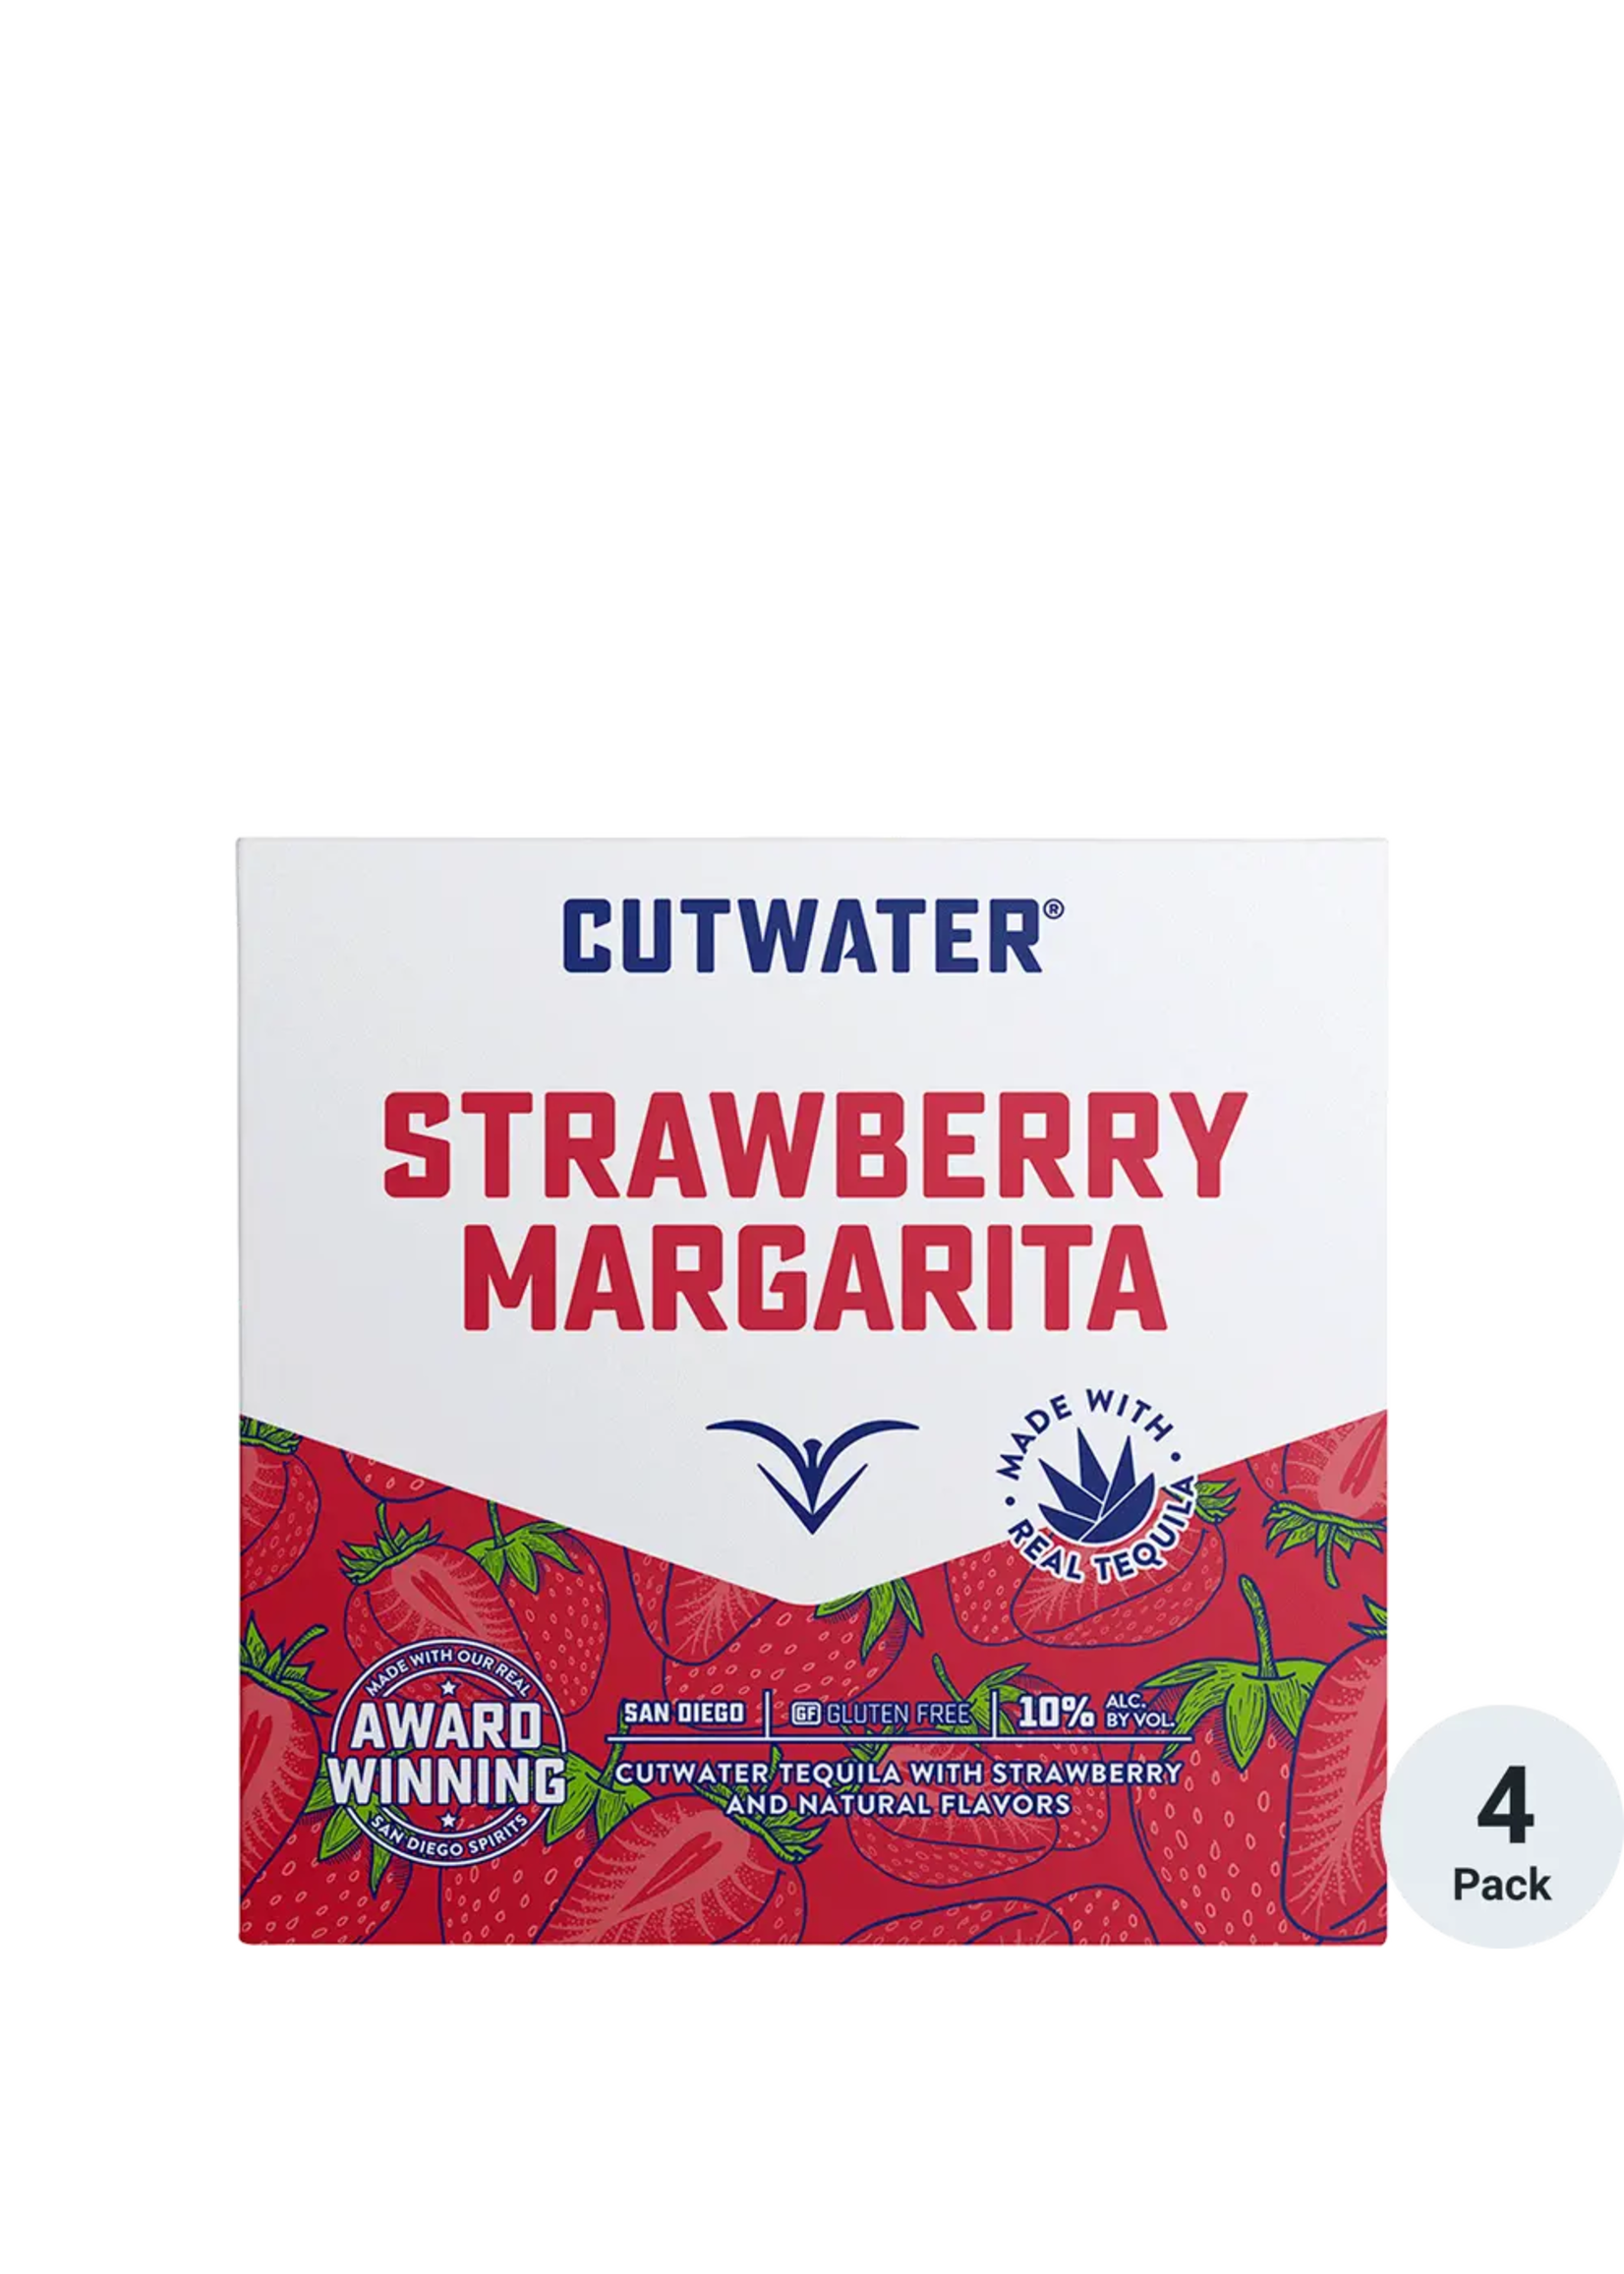 CUTWATER COCKTAIL STRAWBERRY MARGARITA 20PF 4PK 12OZ CANS